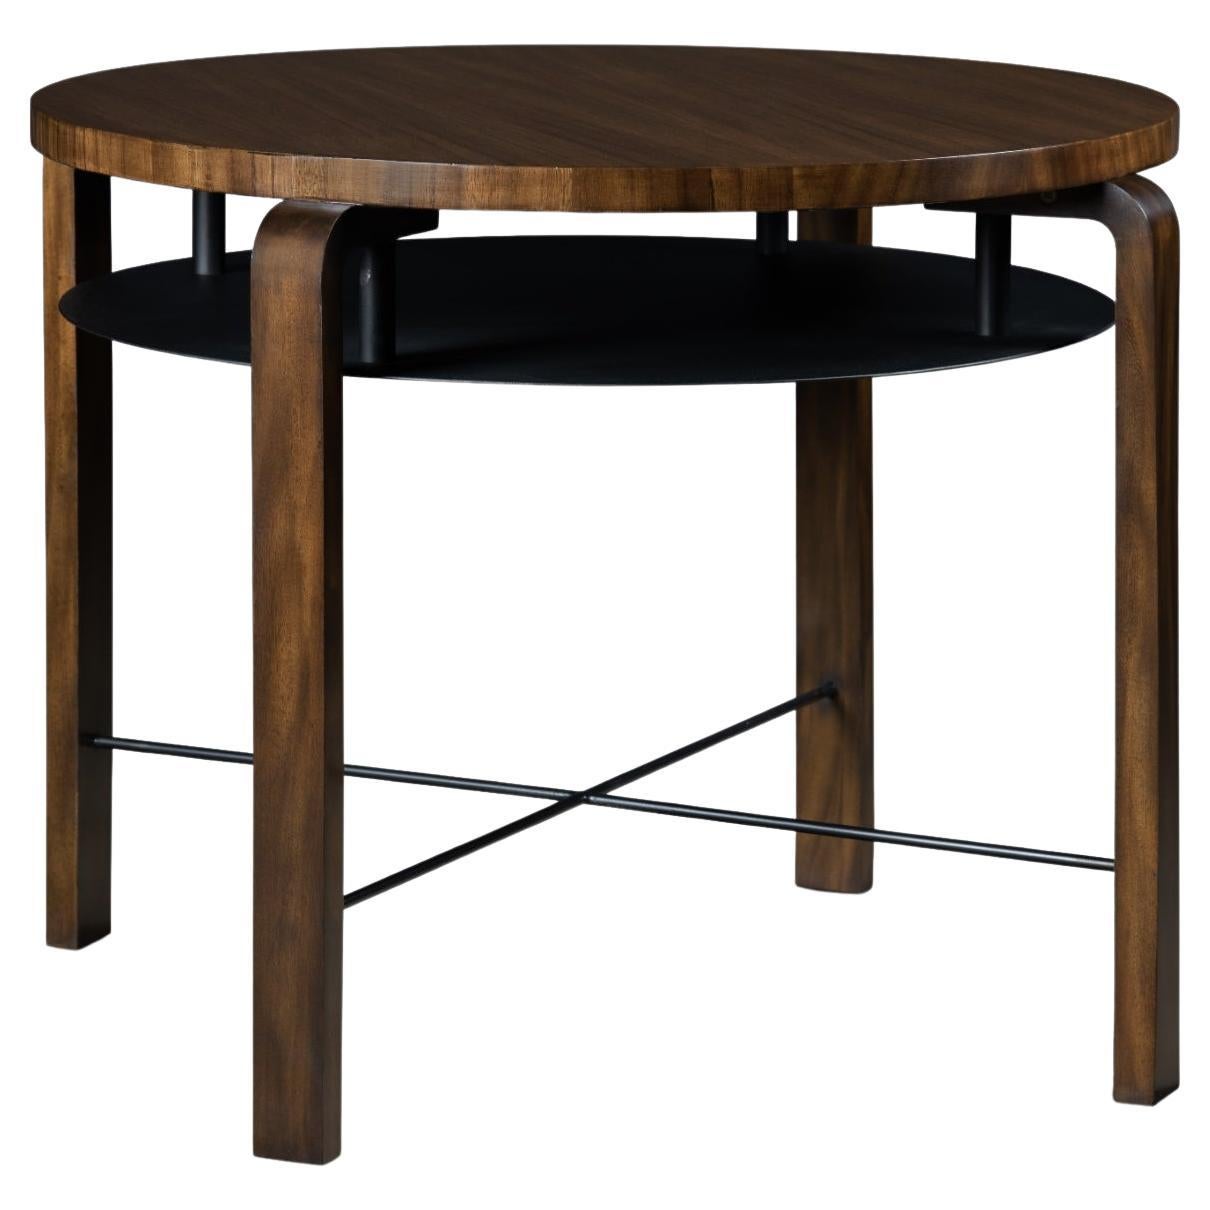 Wood Haslev lamp table with huanacastle veneer, iron shelf and details For Sale